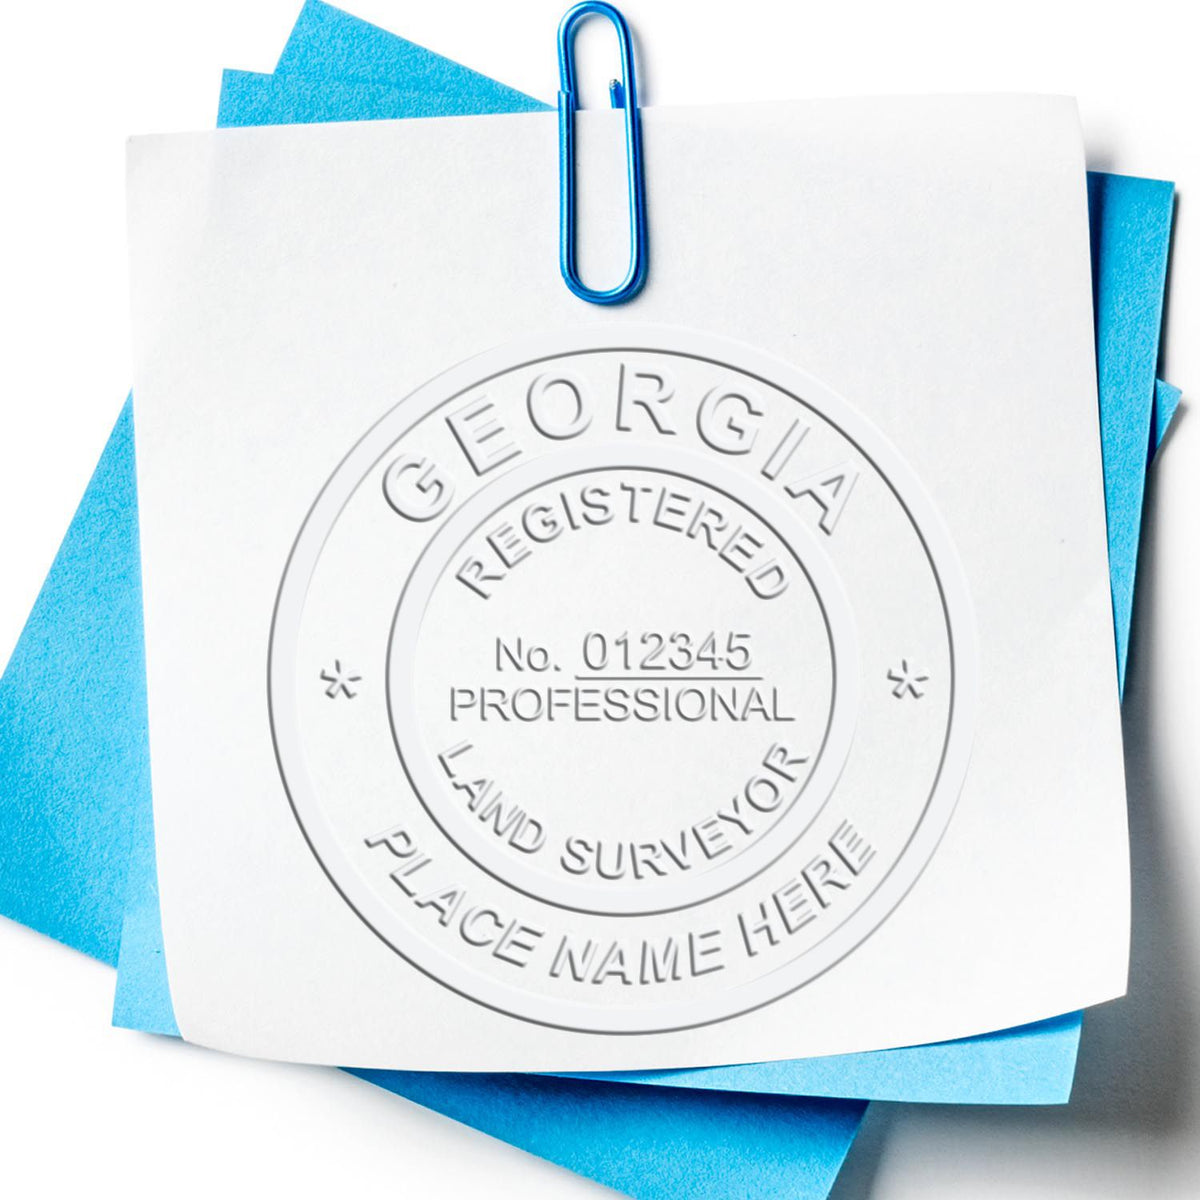 A photograph of the State of Georgia Soft Land Surveyor Embossing Seal stamp impression reveals a vivid, professional image of the on paper.